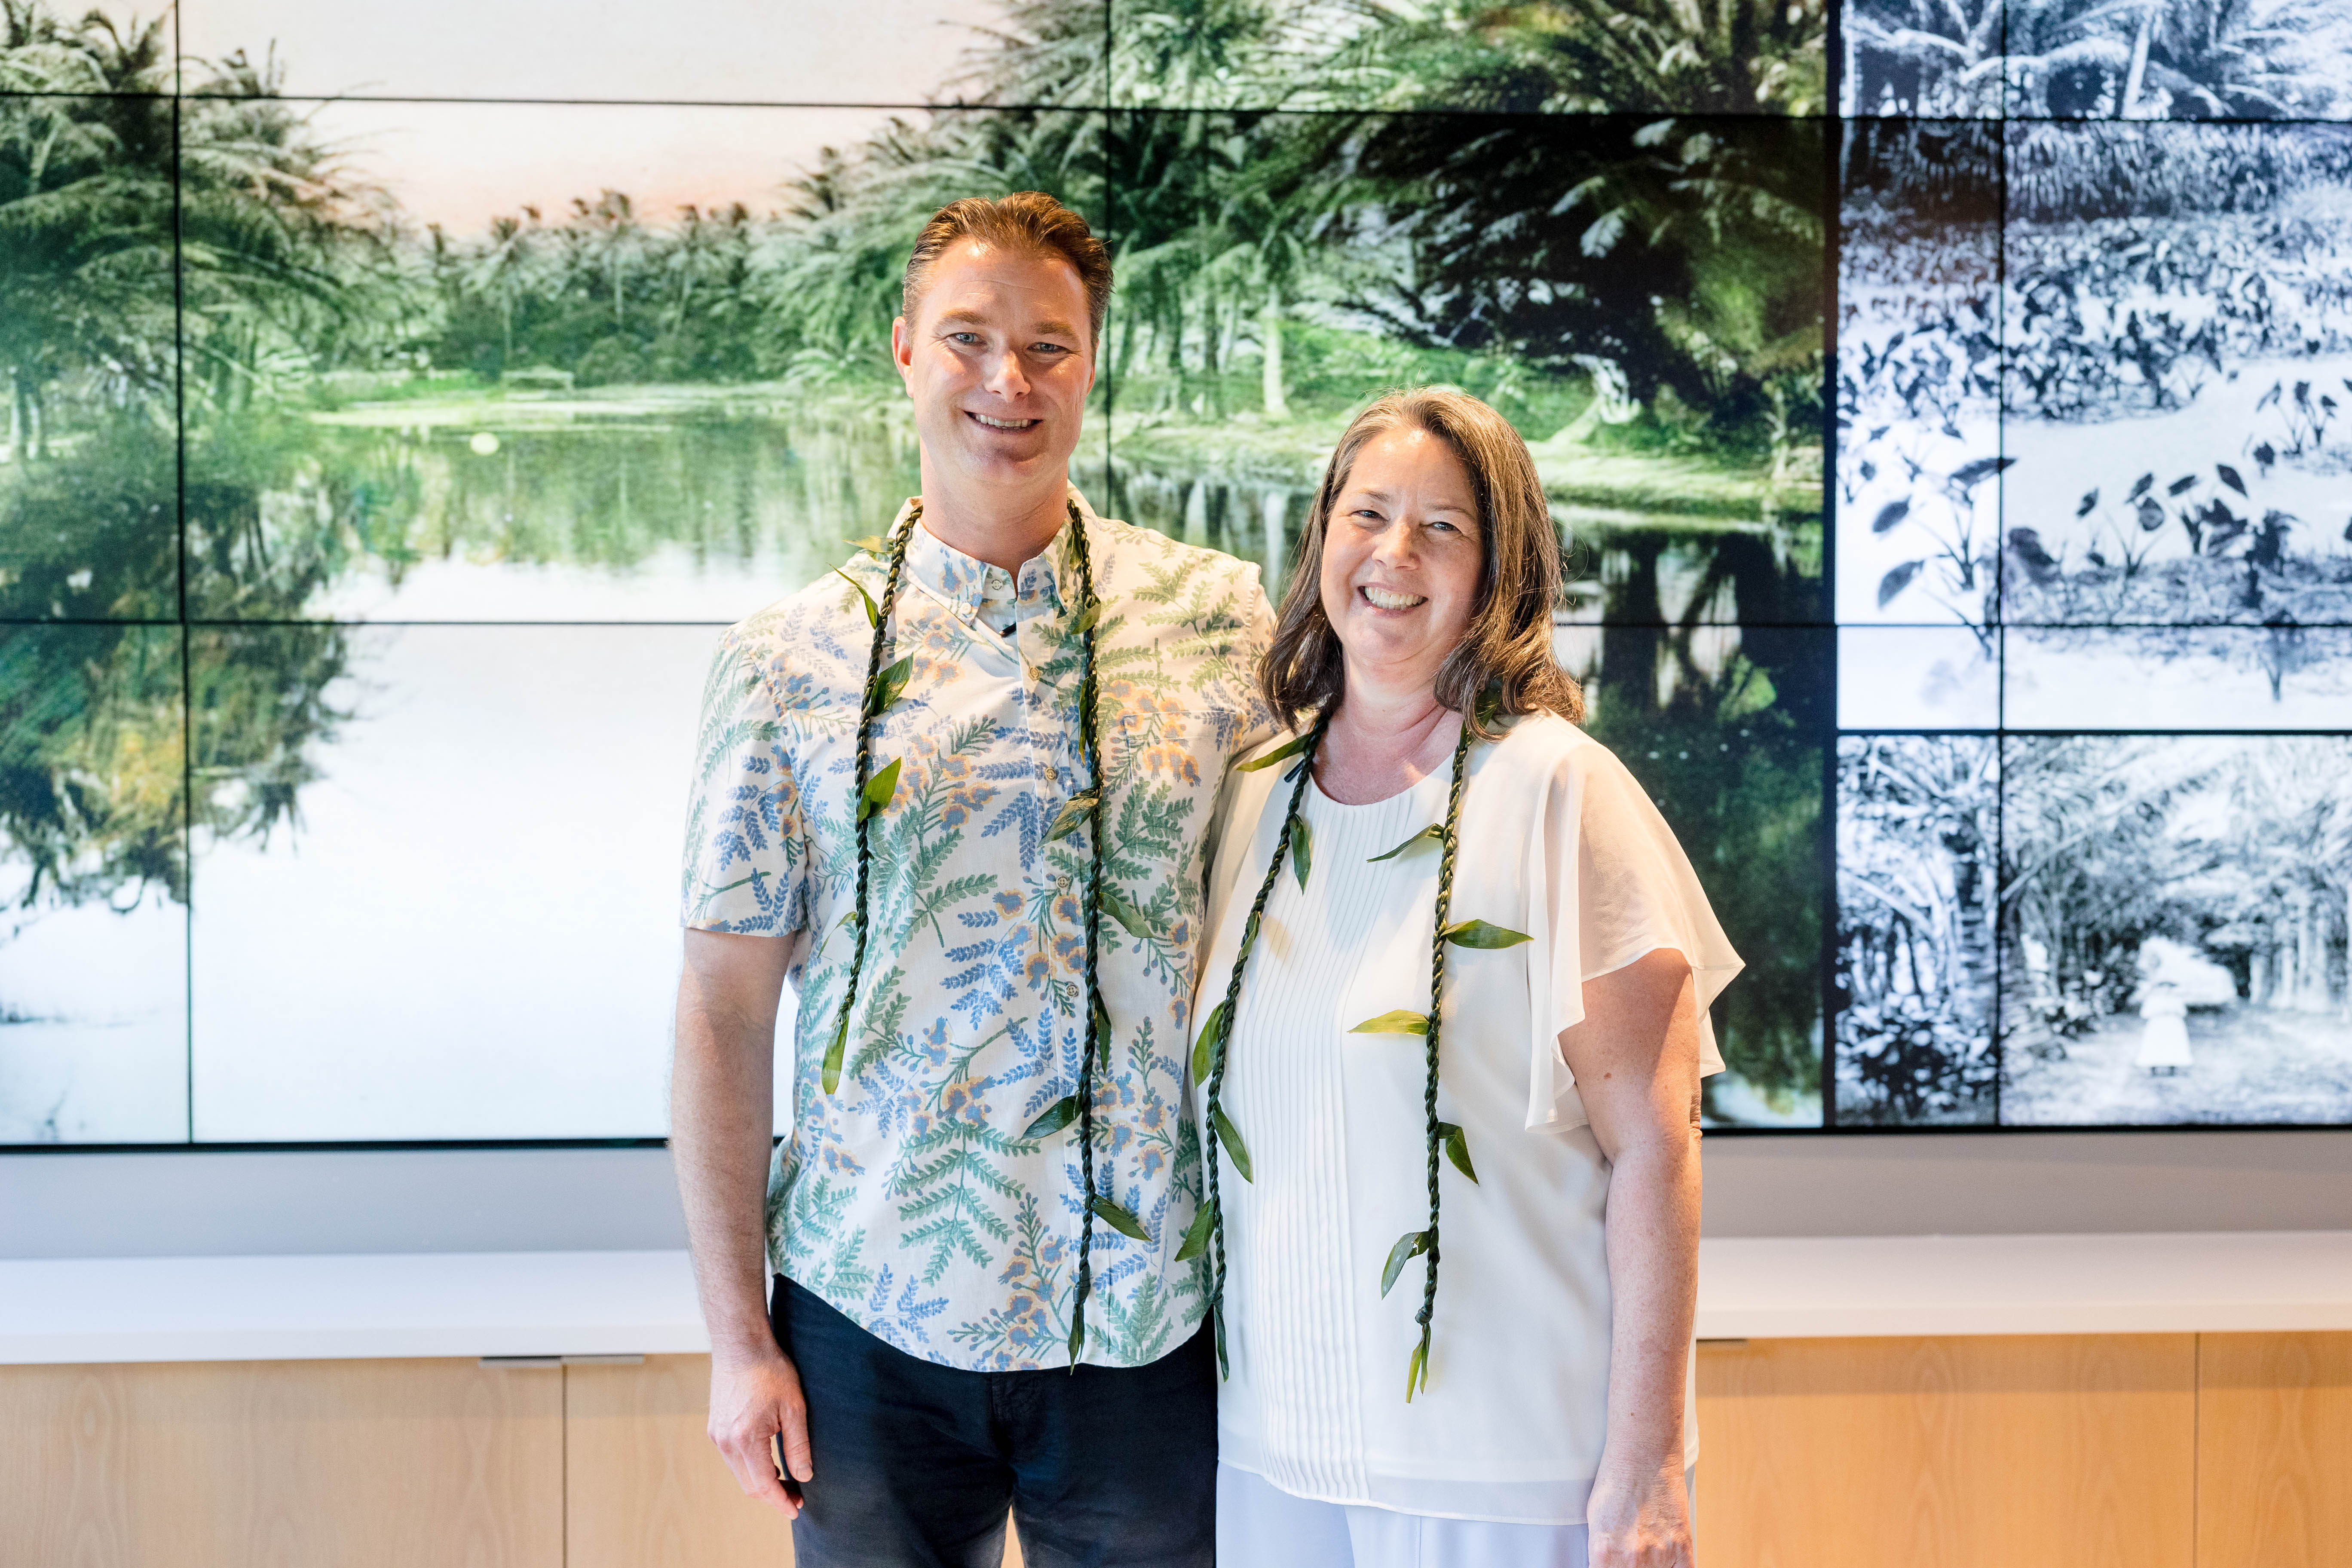 Man and Woman with leis in IBM building